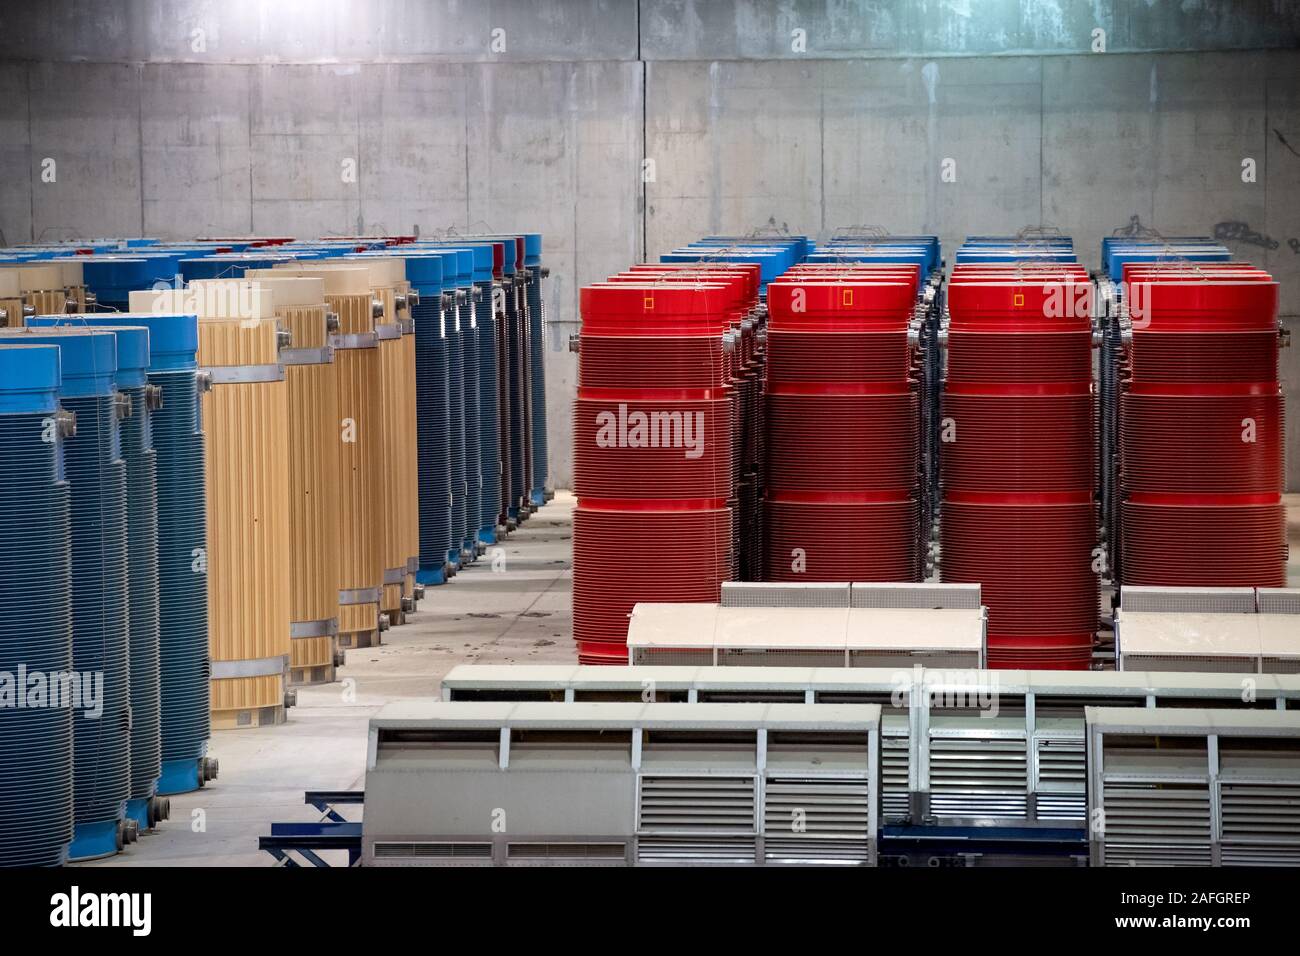 Gorleben, Germany. 11th Dec, 2019. Containers with high-level radioactive waste and transport hoods are in interim storage. The Gorleben nuclear waste storage facility is an interim storage facility for spent fuel elements and high-level radioactive waste. To date, 13 Castor transports with highly radioactive material have reached the transport container warehouse between 1995 and 2011. Until a repository has been found, the nuclear waste is to be temporarily stored there. Credit: Sina Schuldt/dpa/Alamy Live News Stock Photo